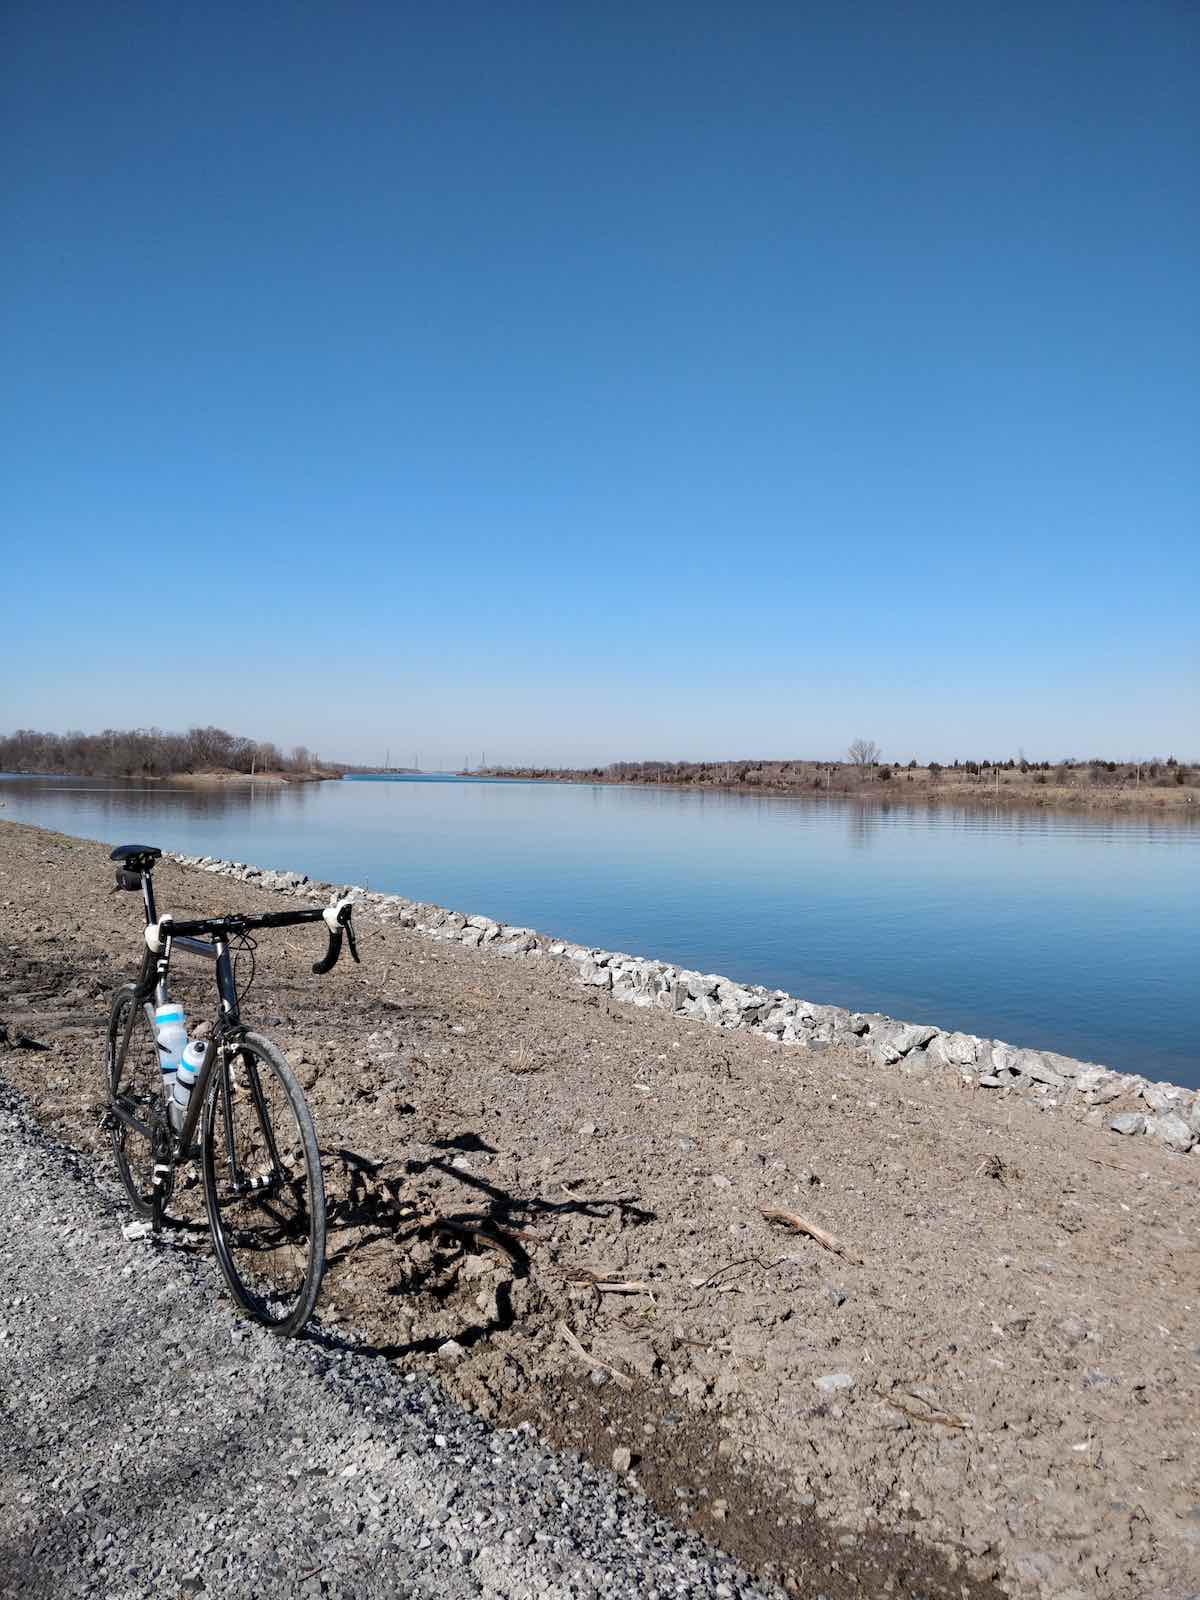 bikerumor pic of the day bicycle at the side of a canal with bare rocky land on either side in port colborne ontario canada.